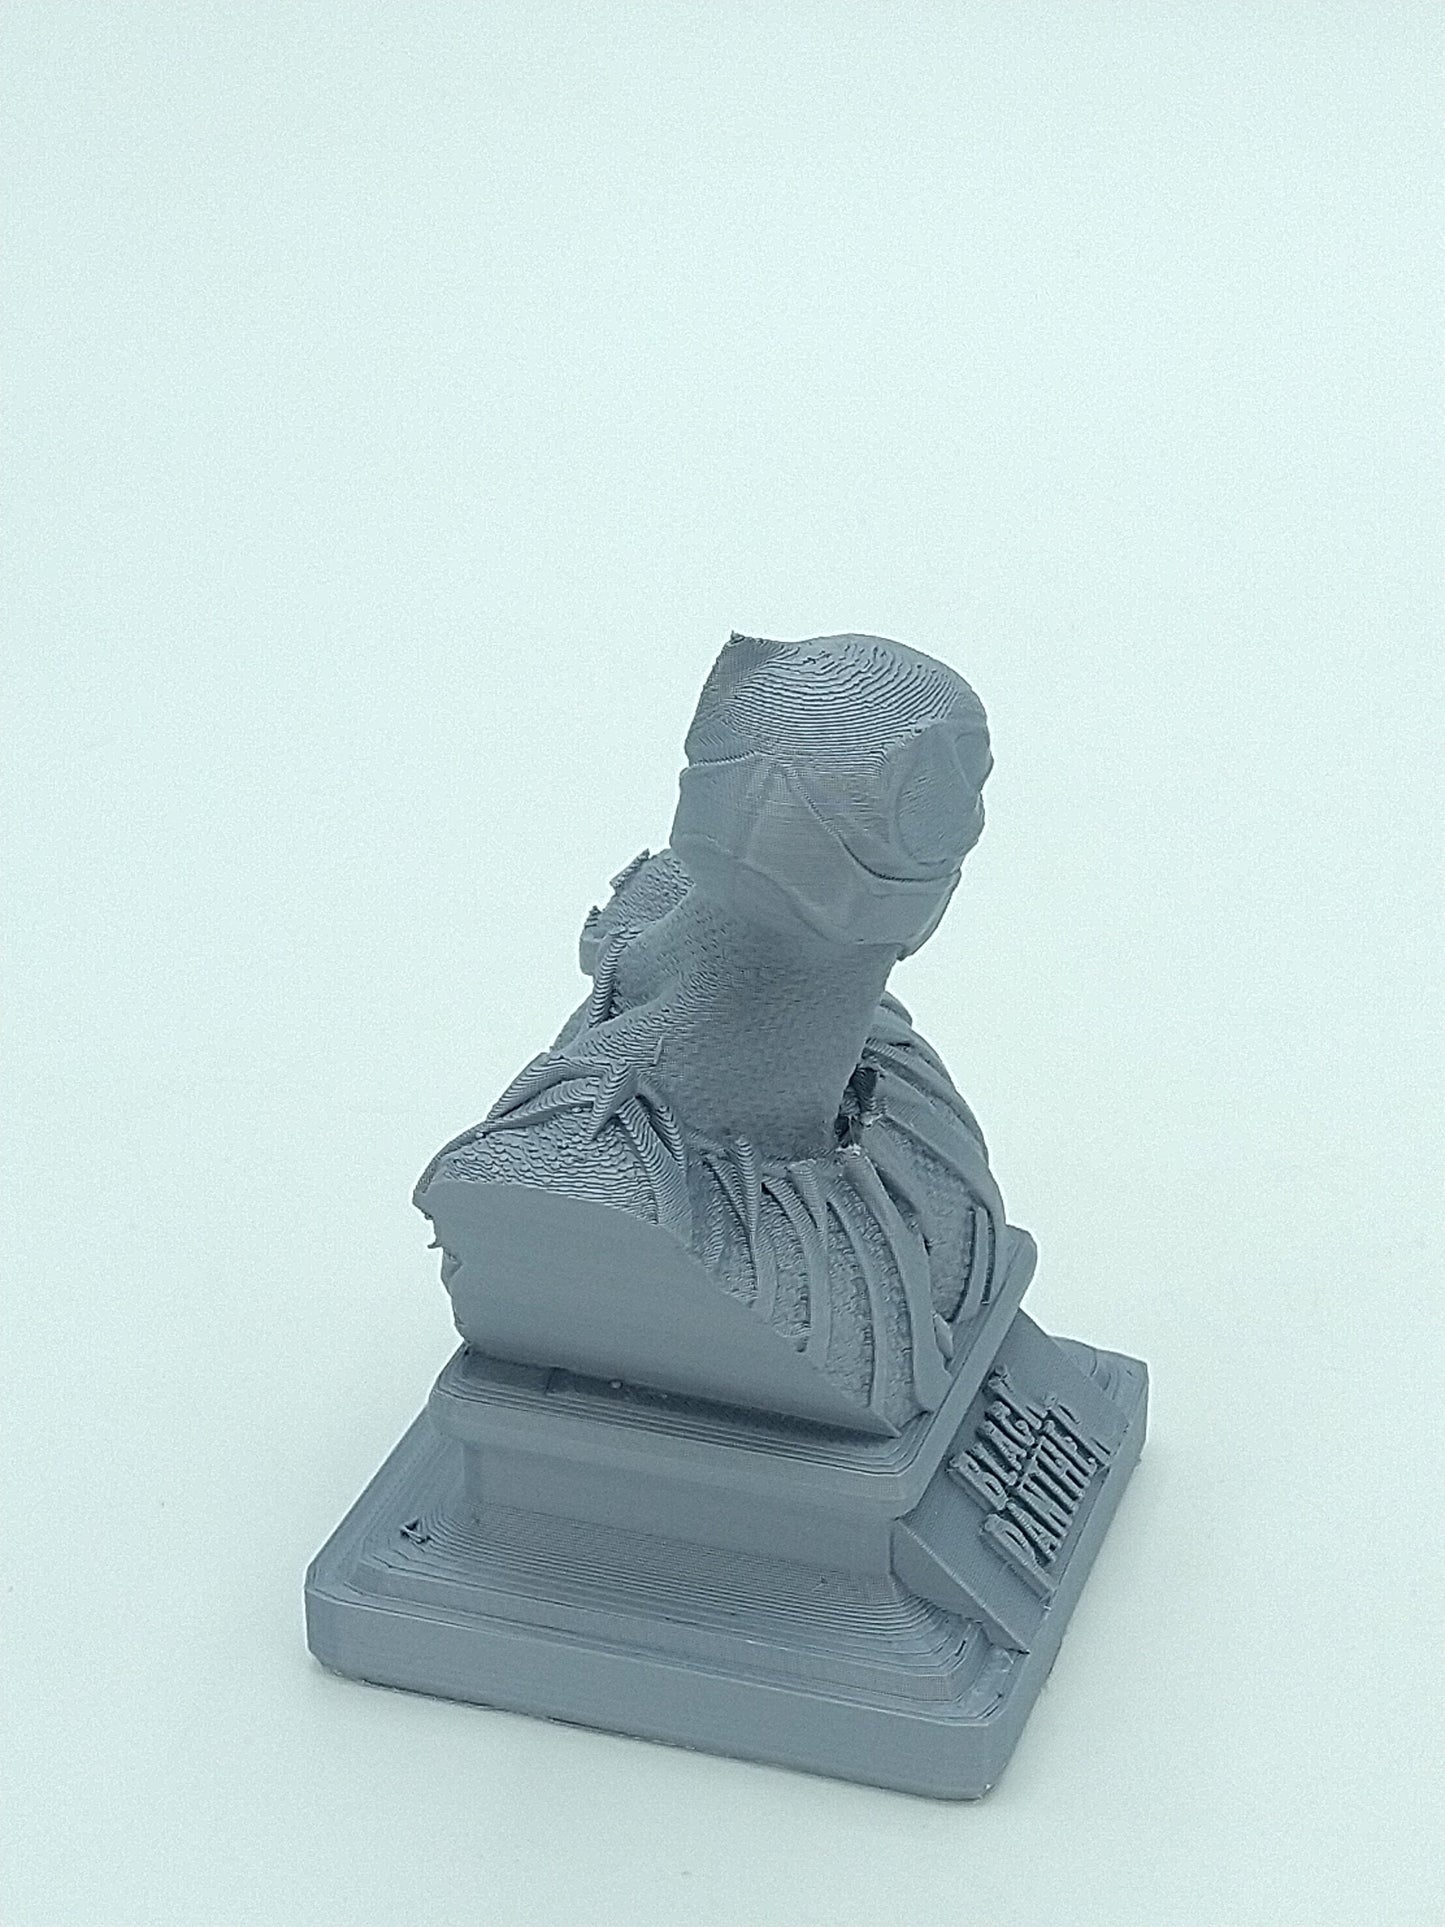 BLACK PANTHER Bust Statue Figure 3.5" 3D Printed